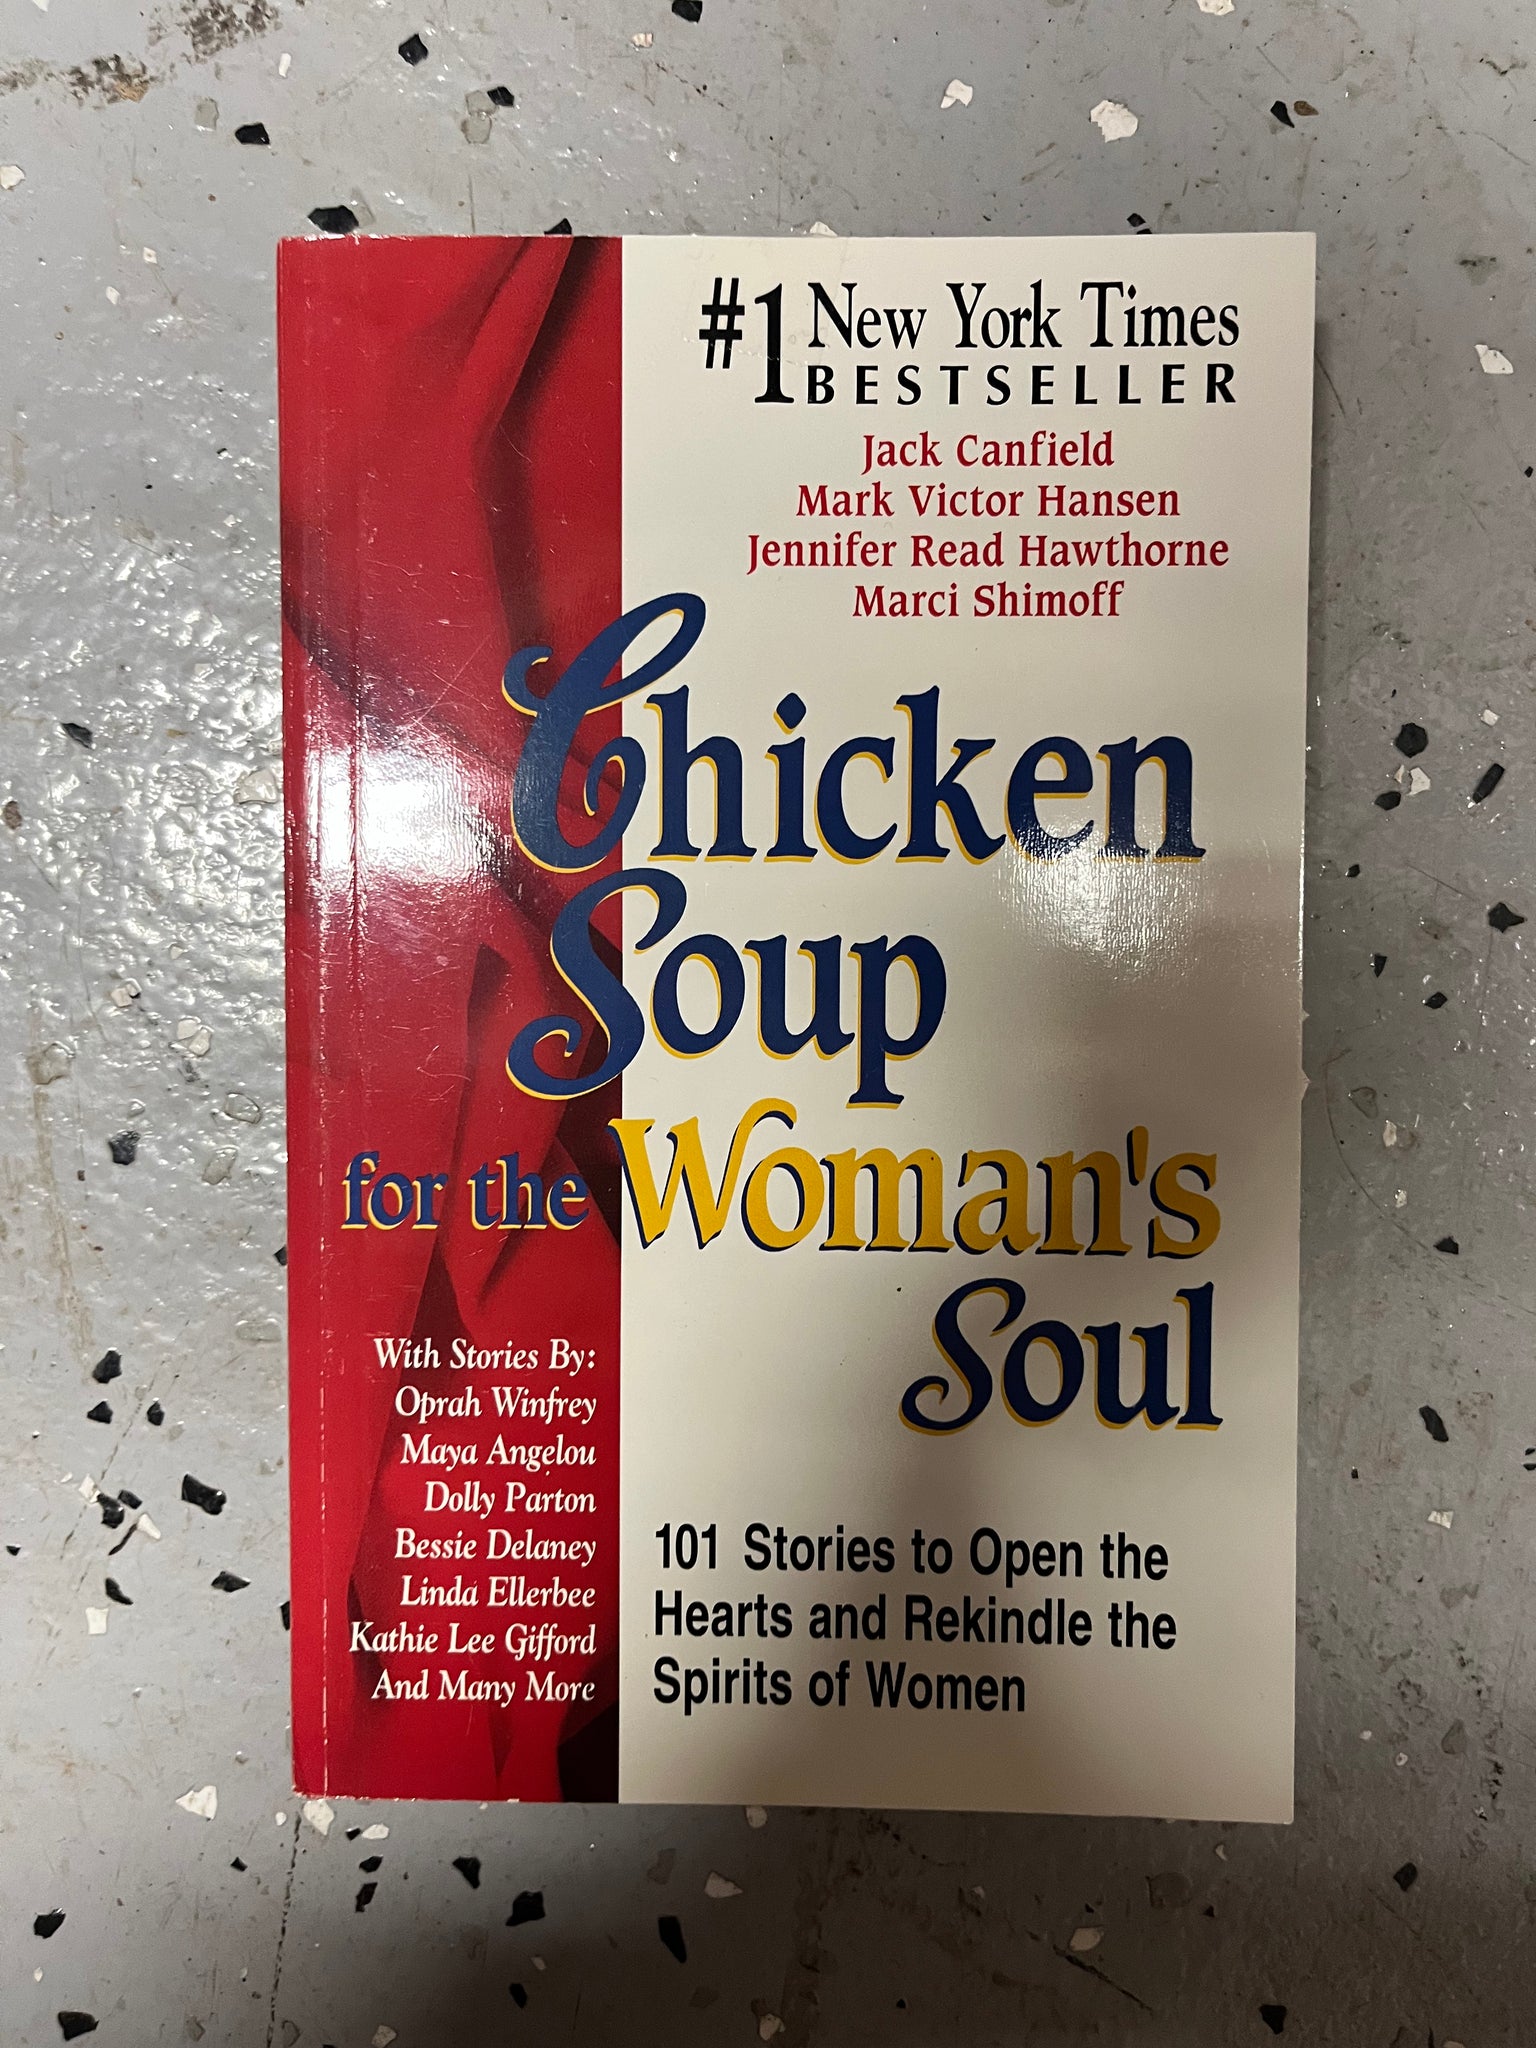 Chicken Soup for the Woman's Soul: 101 Stories to Open the Hearts and Rekindle the Spirits of Women (Chicken Soup for the Soul)